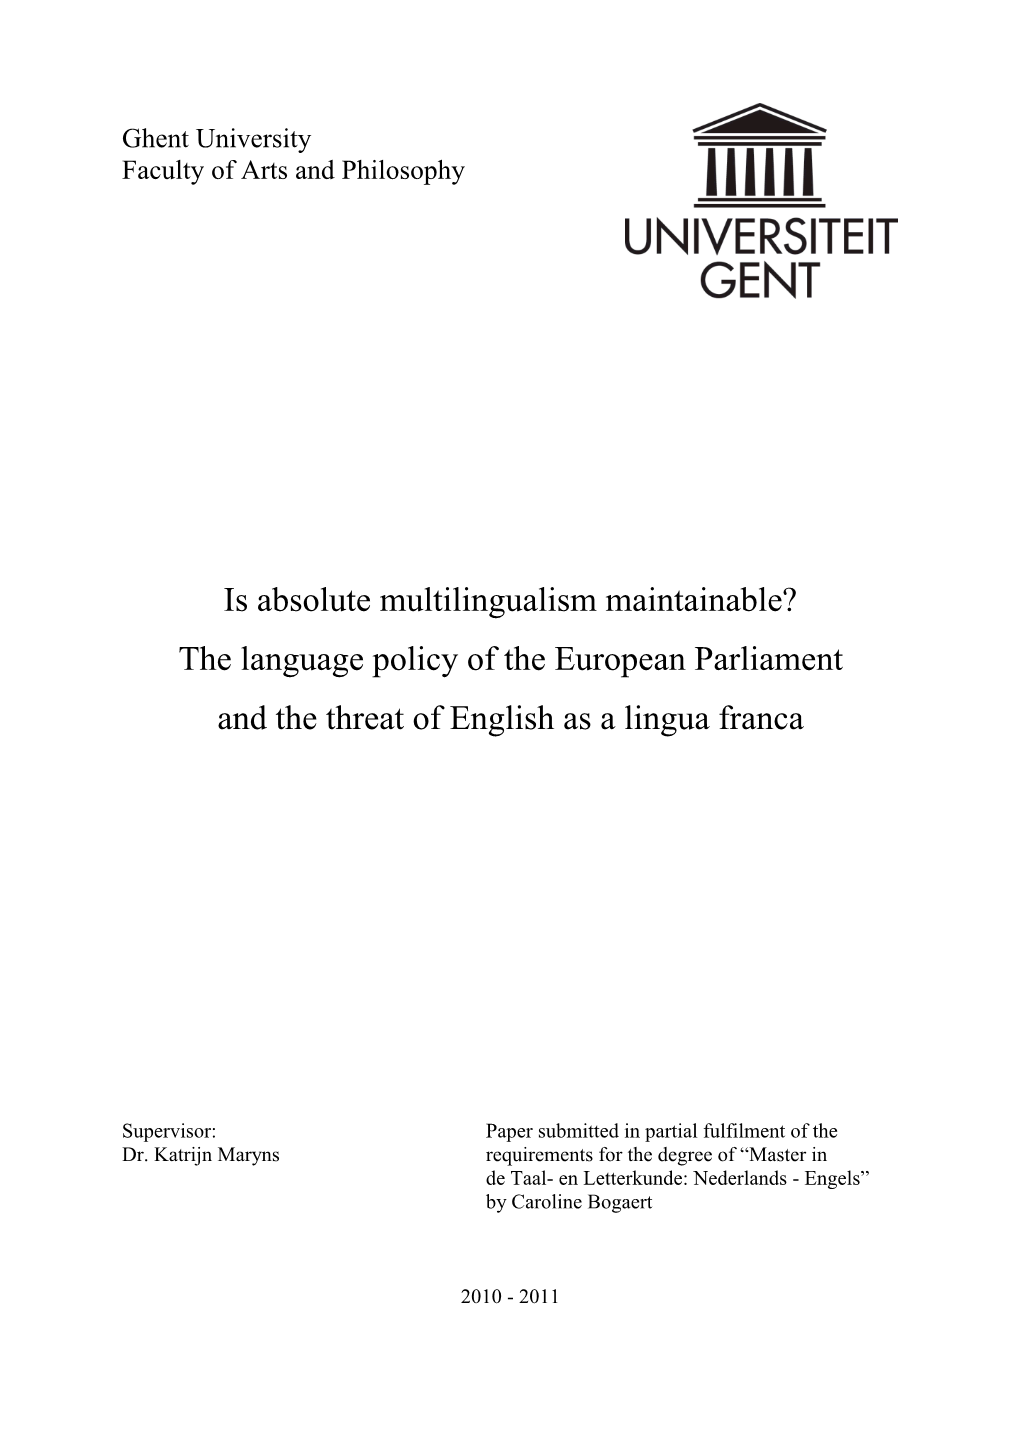 Is Absolute Multilingualism Maintainable? the Language Policy of the European Parliament and the Threat of English As a Lingua Franca